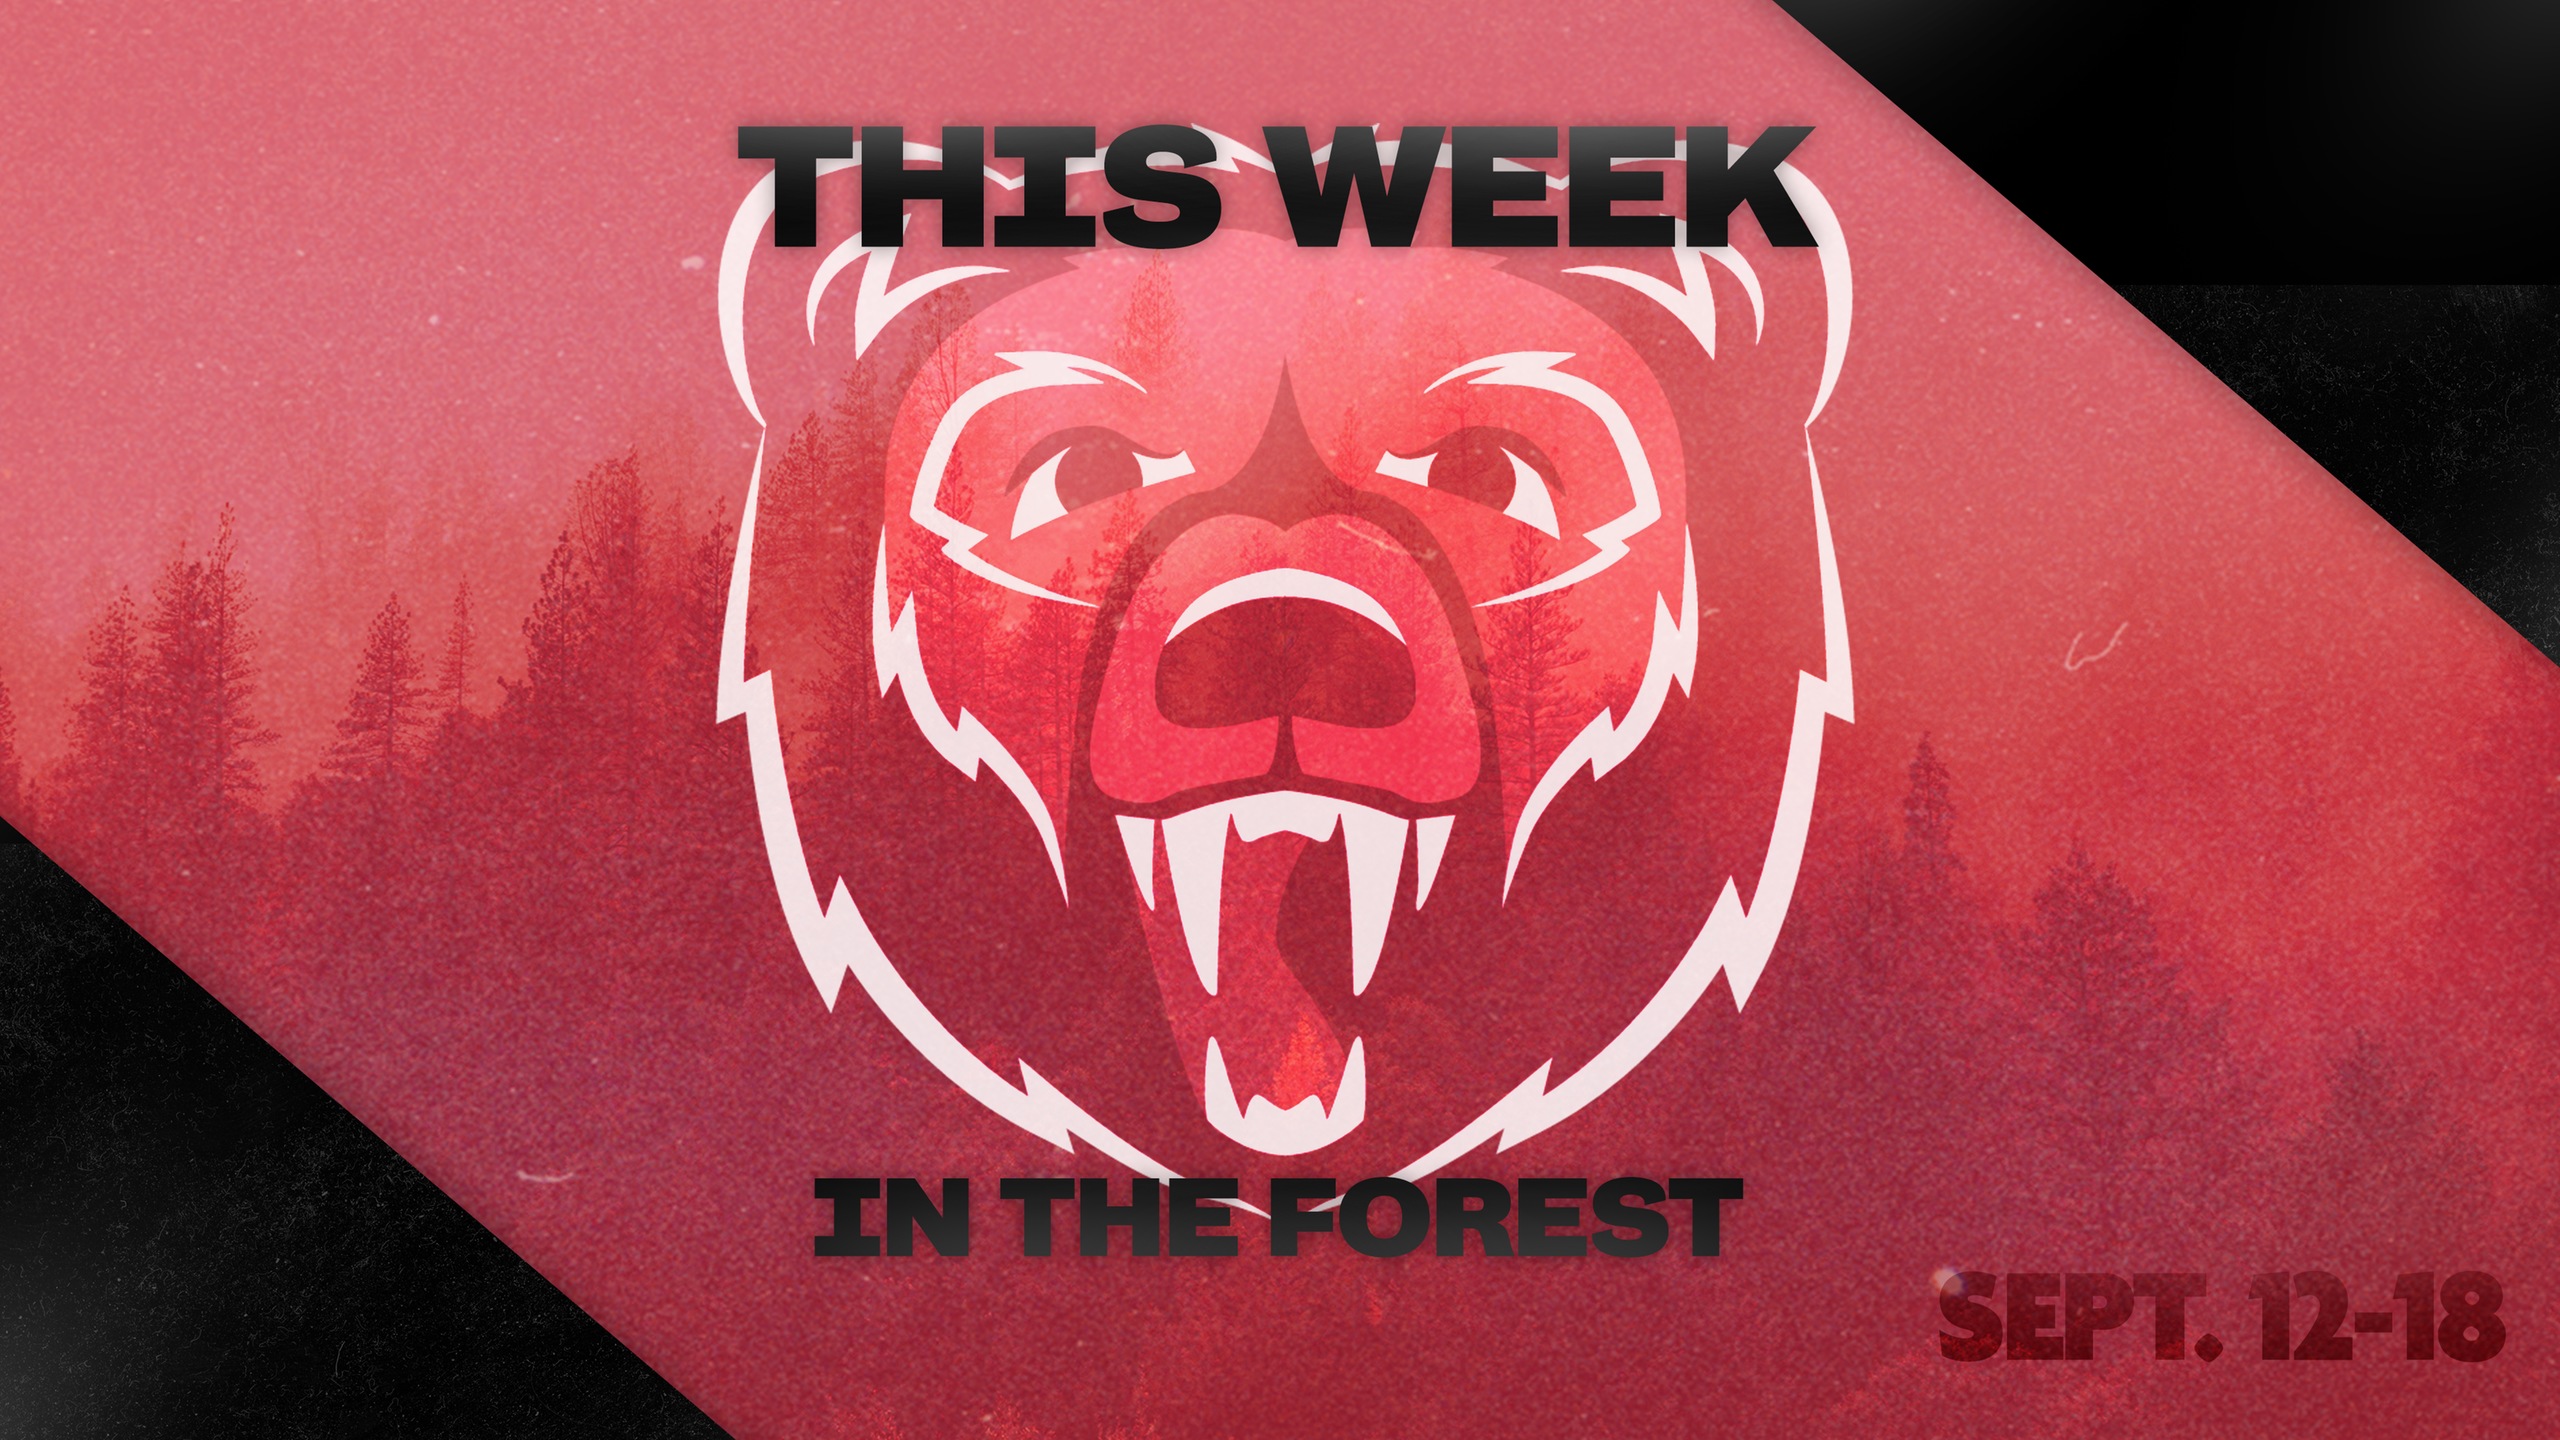 This Week in The Forest: Sept. 12-18